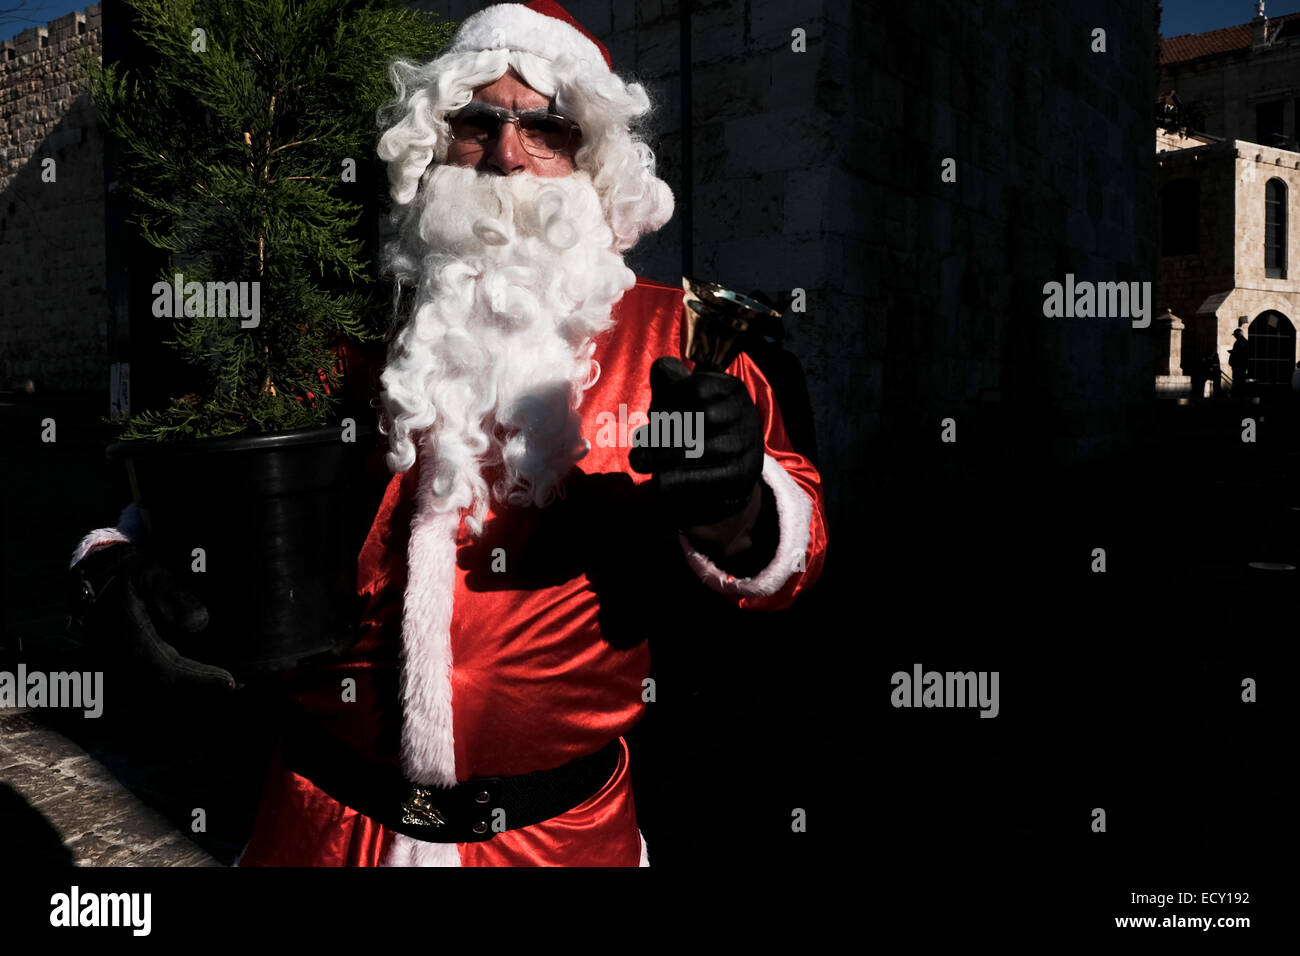 Jerusalem. 22nd Dec, 2014. Santa Claus, or 'Baba Noel' as he is called in the local Arab Christian language, walks on the Old City walls overlooking Jerusalem. The Jerusalem Municipality and the Jewish National Fund distributed specially grown Christmas trees to the Christian population at the Jaffa Gate. Credit:  Nir Alon/Alamy Live News Stock Photo